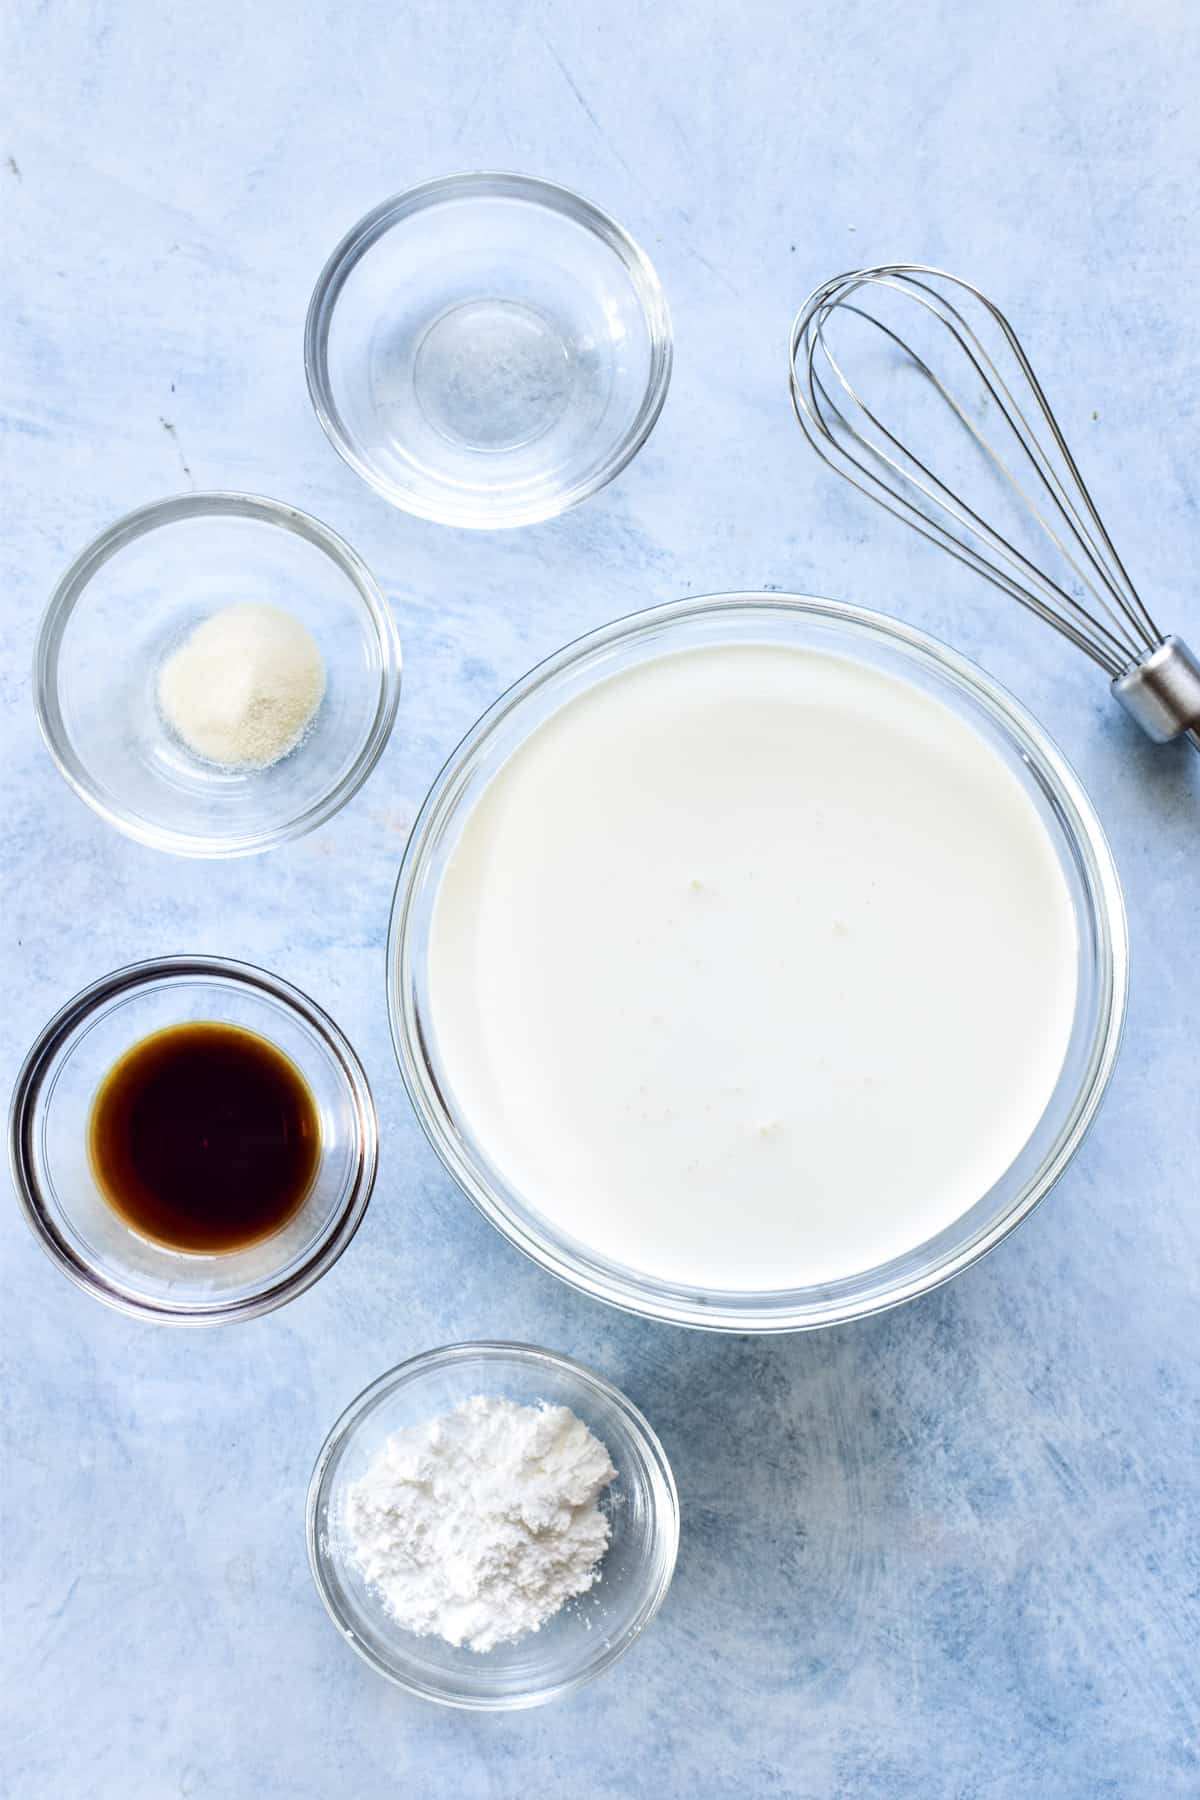 Homemade Cool Whip ingredients